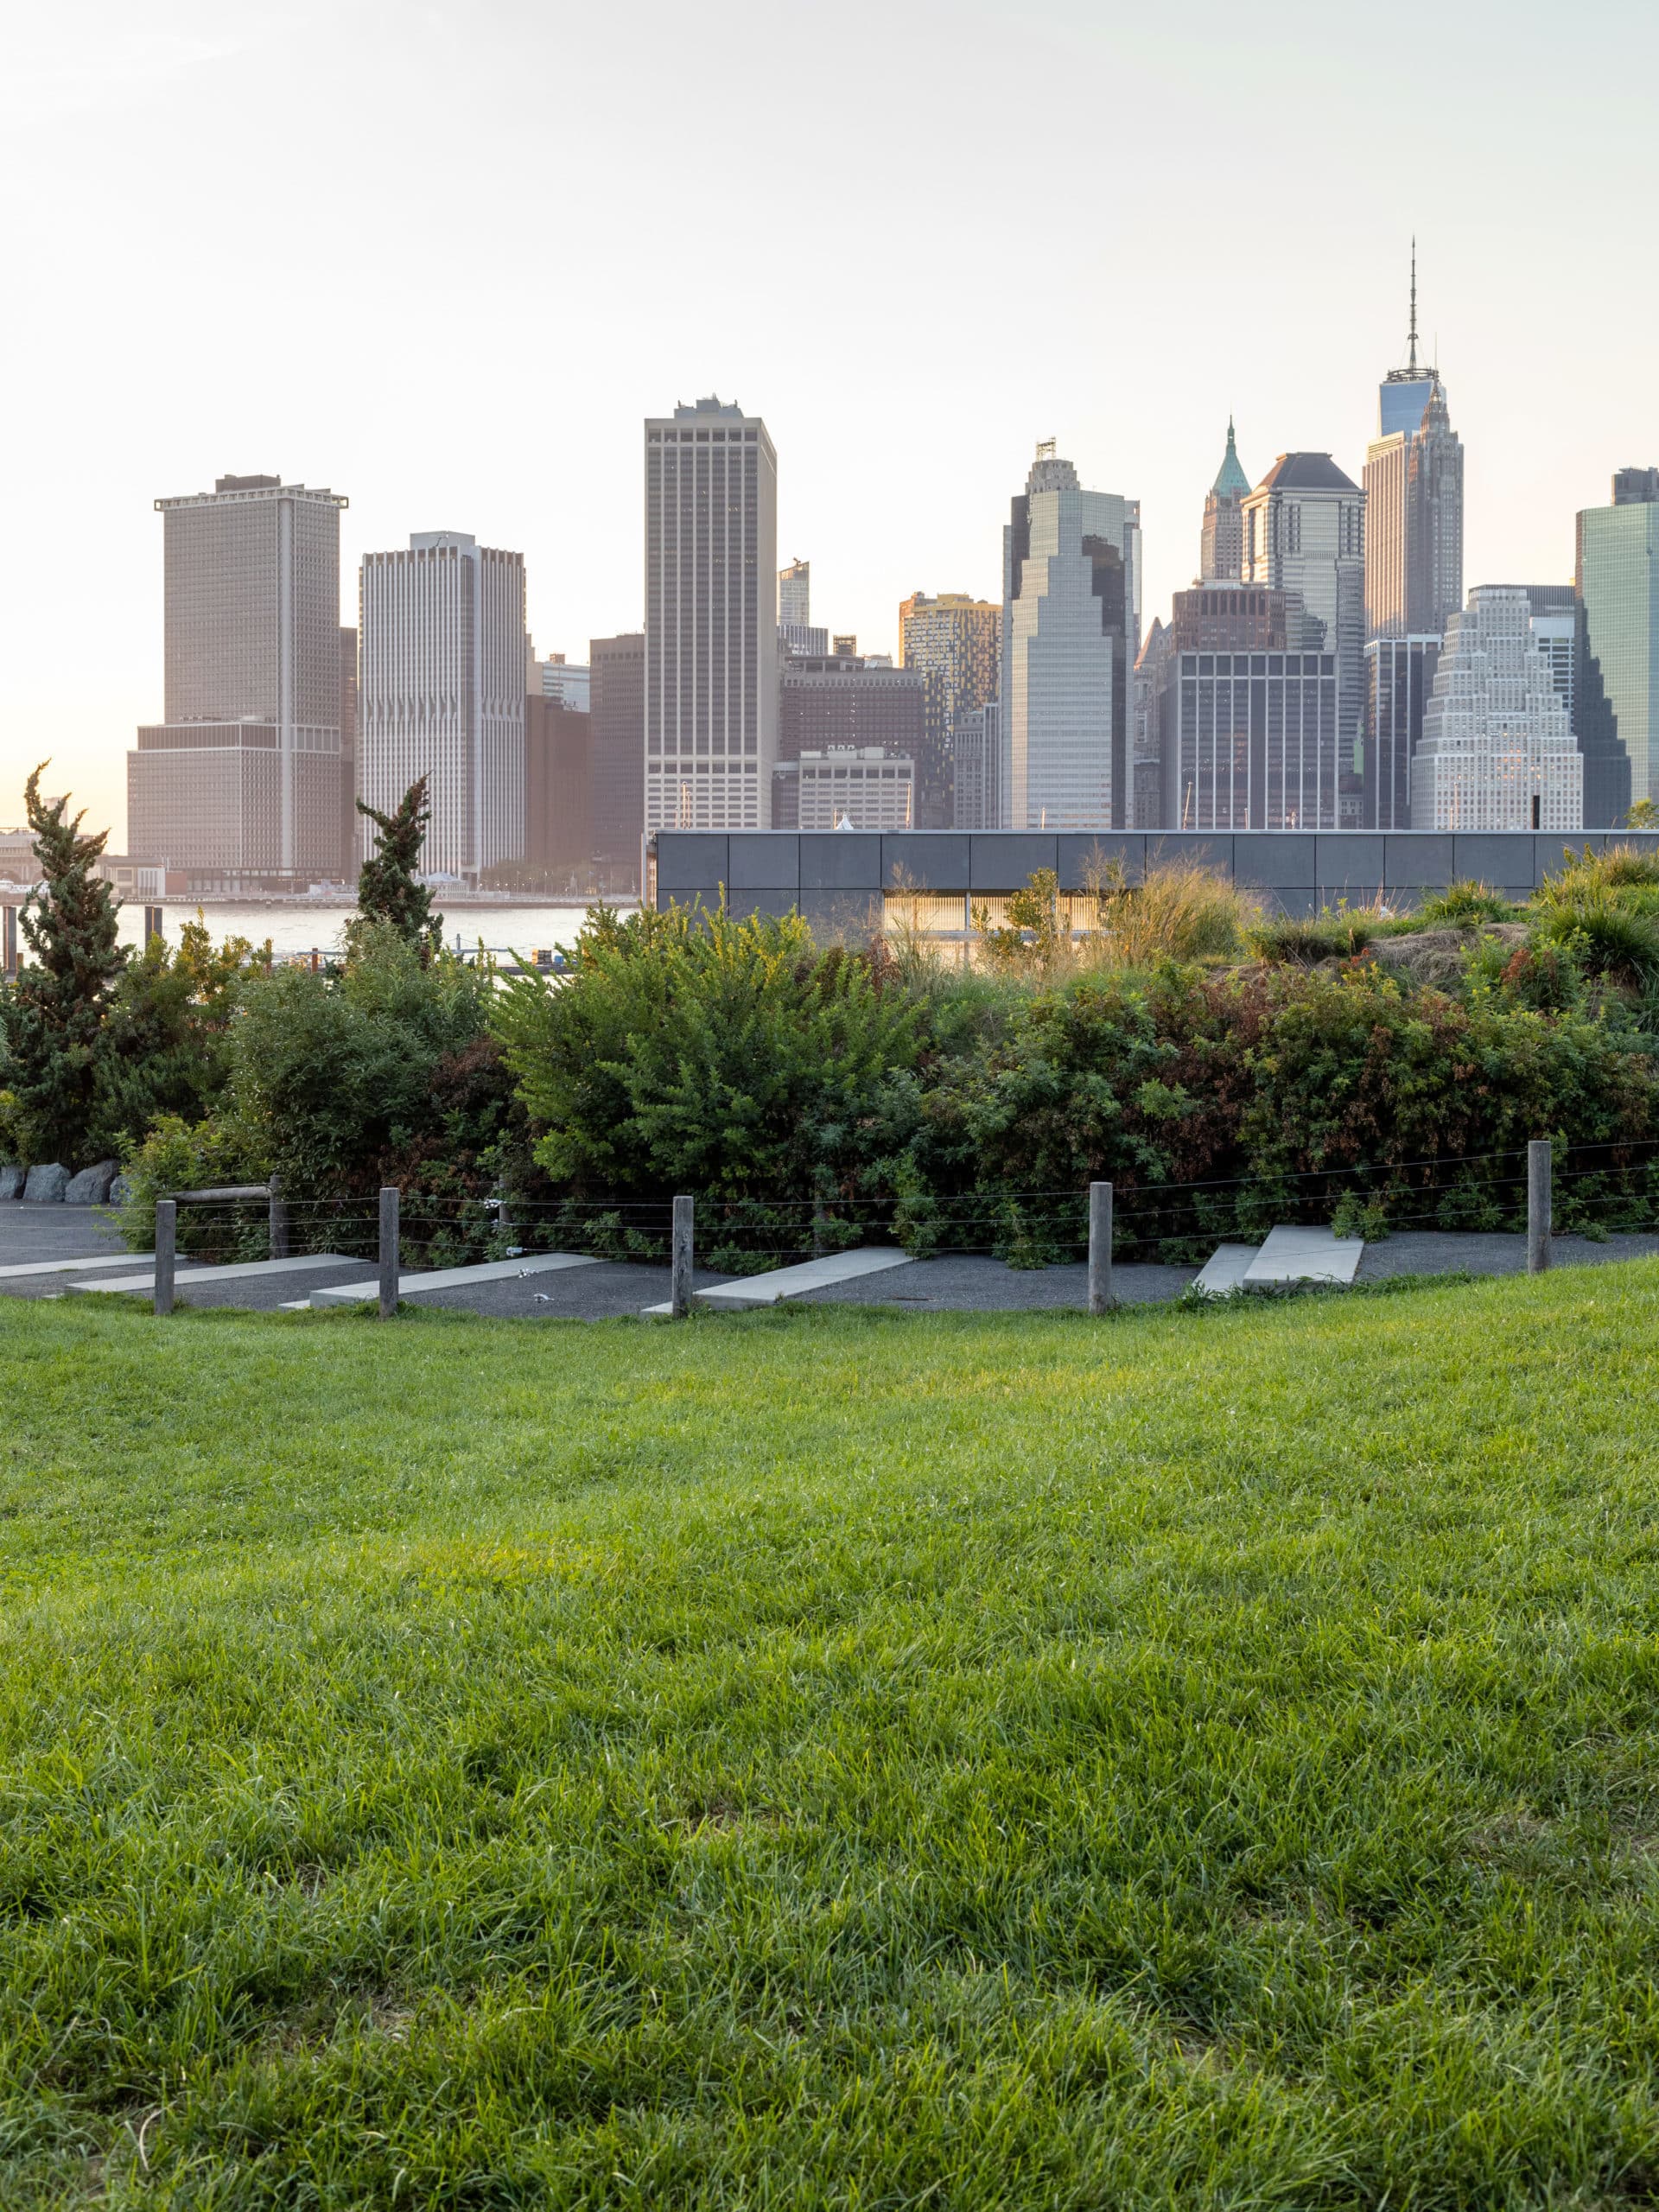 Pier 5 Uplands Lawn and bushes along stairway with view of lower Manhattan at sunset.